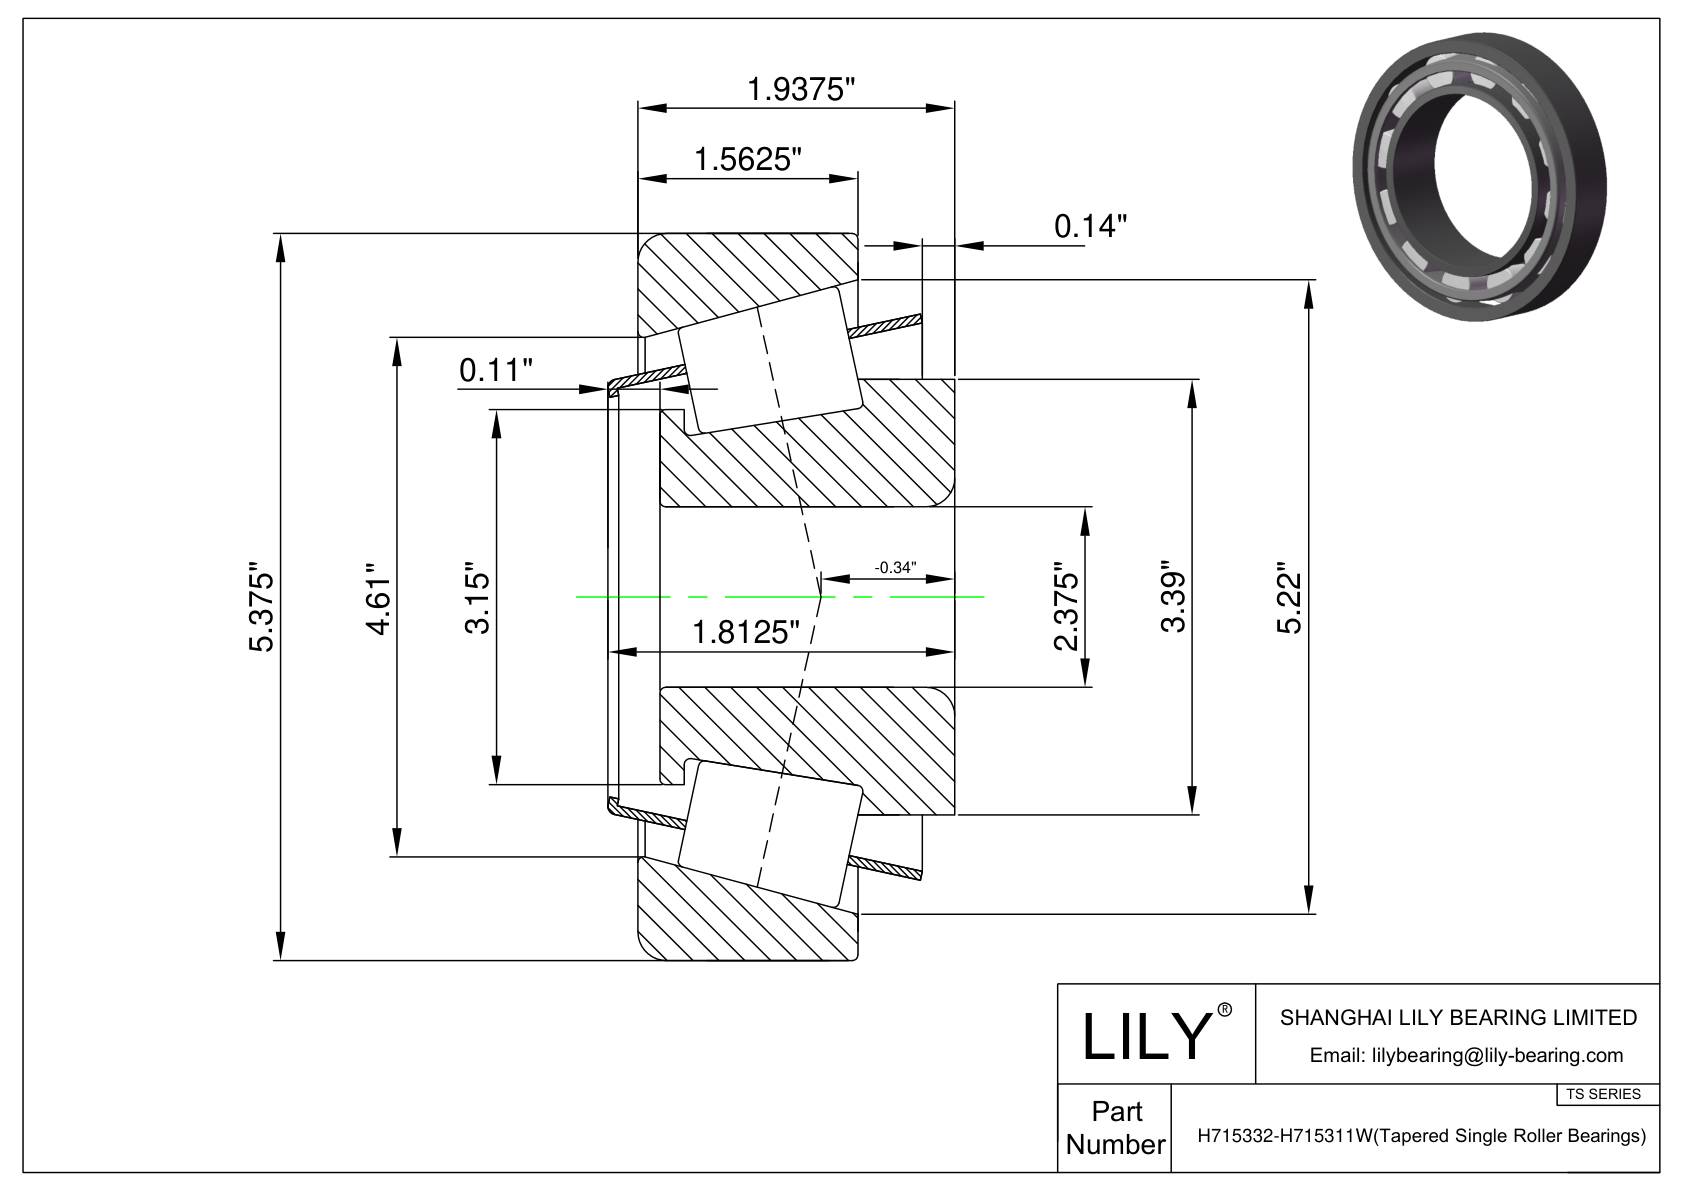 H715332-H715311W TS (Tapered Single Roller Bearings) (Imperial) cad drawing